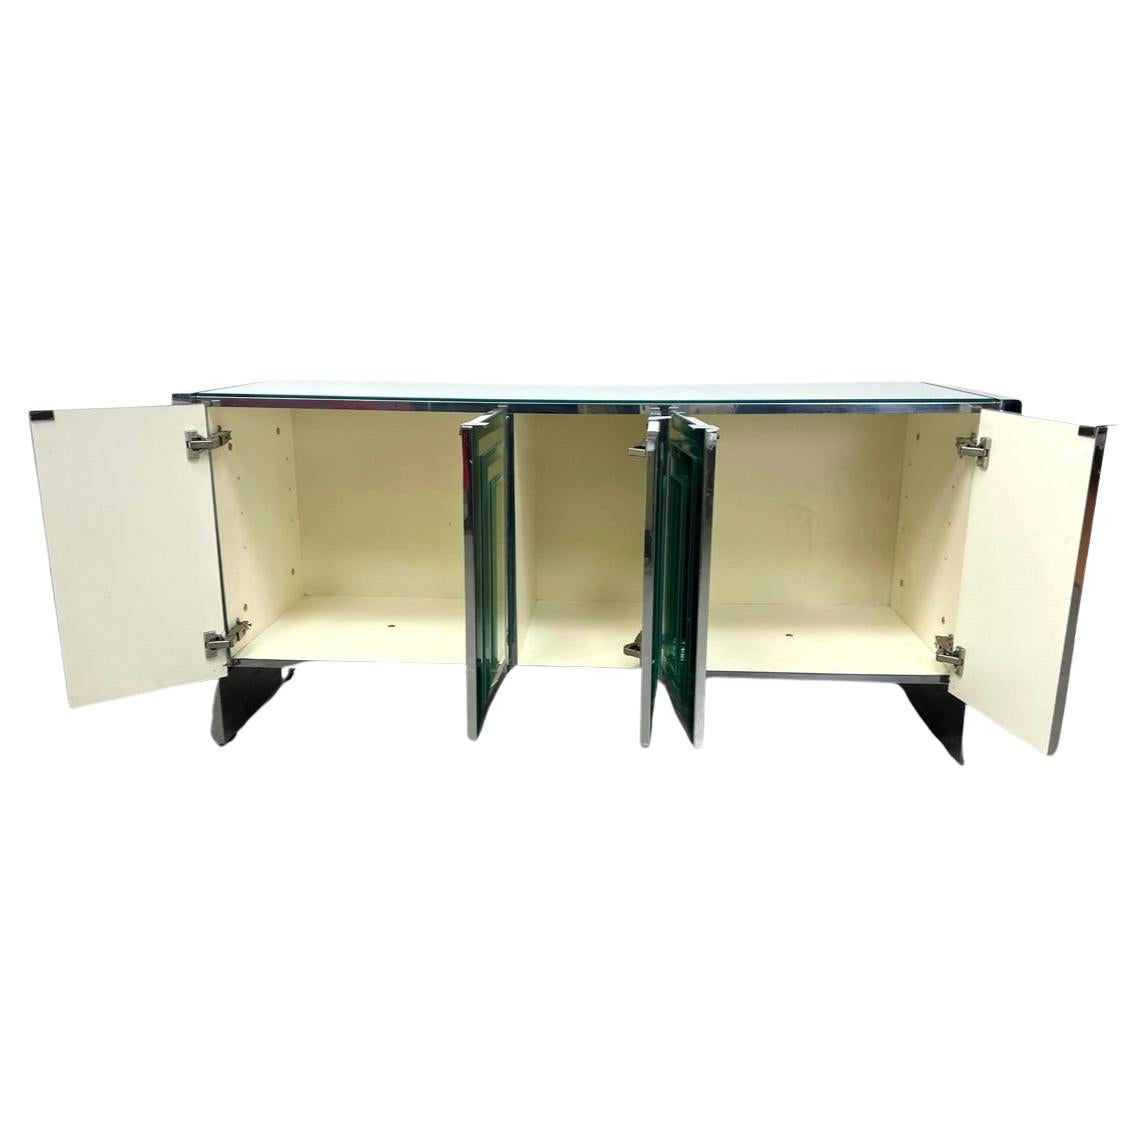 Ello Post Modern Mid century layered Glass Mirror  5 door Credenza or sideboard C. 1980s. Long low Glass staggered Mirror door Credenza with 5 cabinet doors. Has white laminate inside with chrome accents. Come with (2) white laminate adjustable